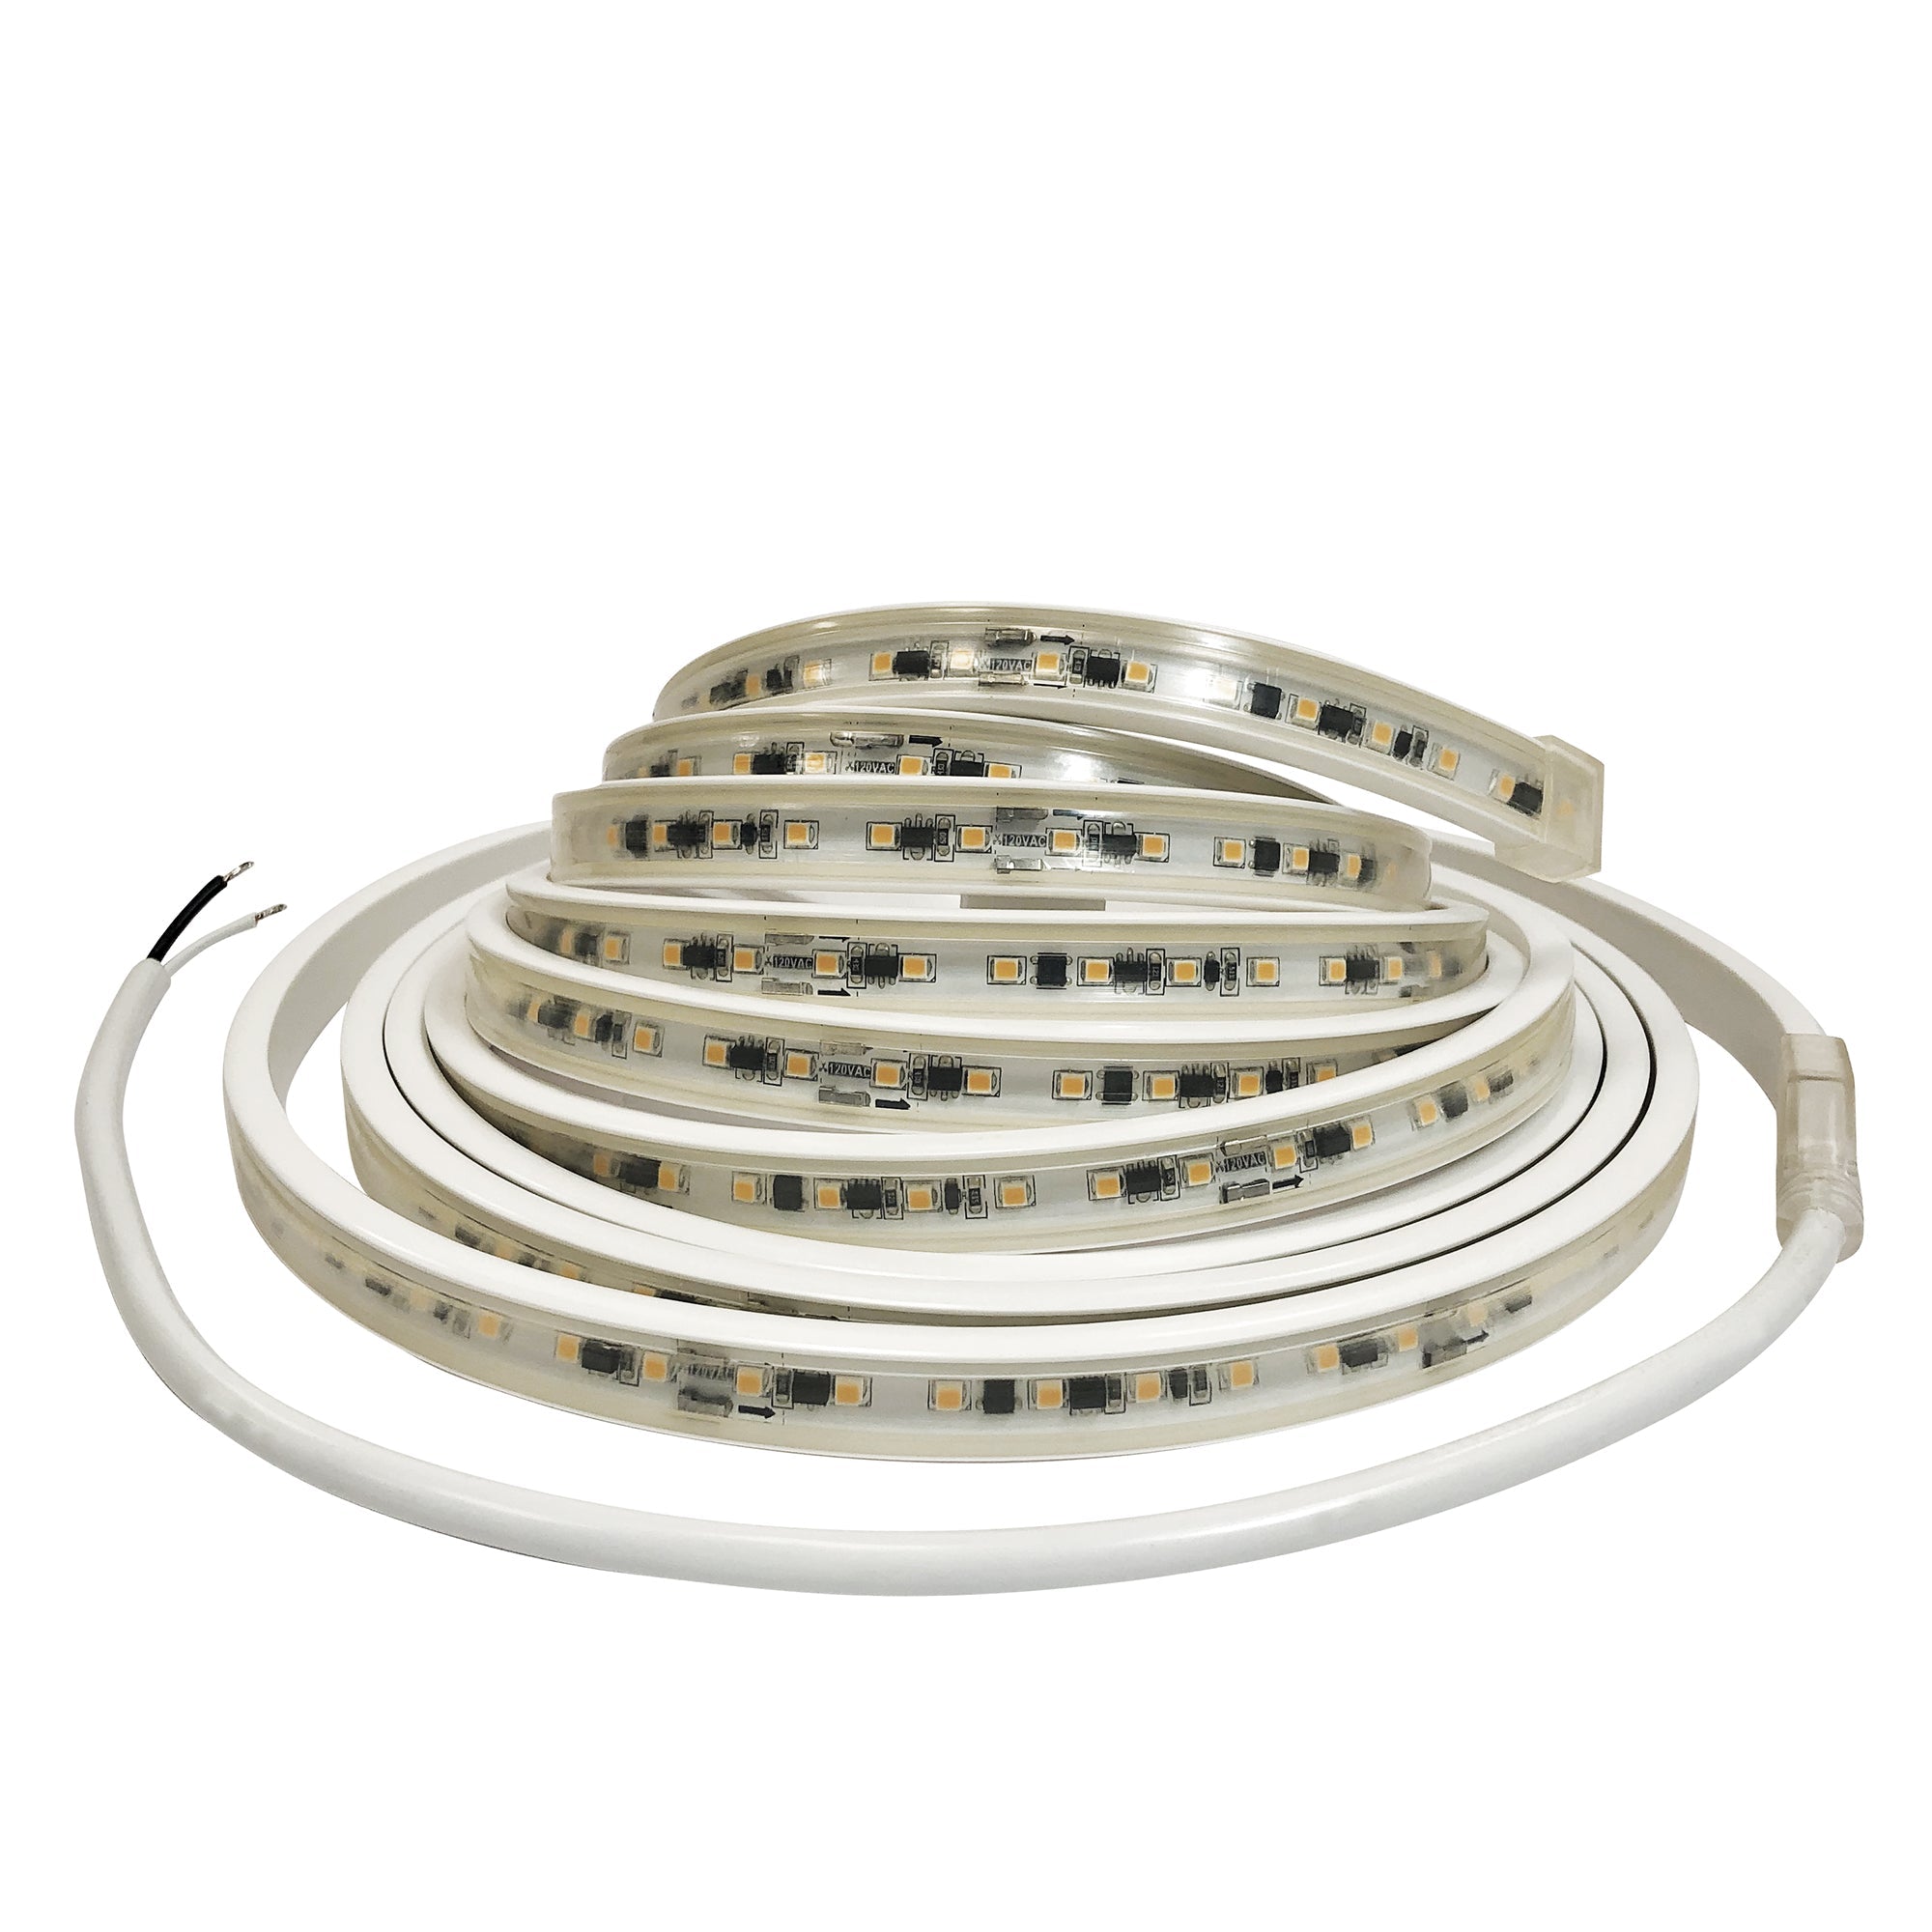 Nora Lighting NUTP13-W50-8-12-930/HW - Accent / Undercabinet - Custom Cut 50-ft, 8-in 120V Continuous LED Tape Light, 330lm / 3.6W per foot, 3000K, w/ Mounting Clips and 8' Hardwired Power Cord